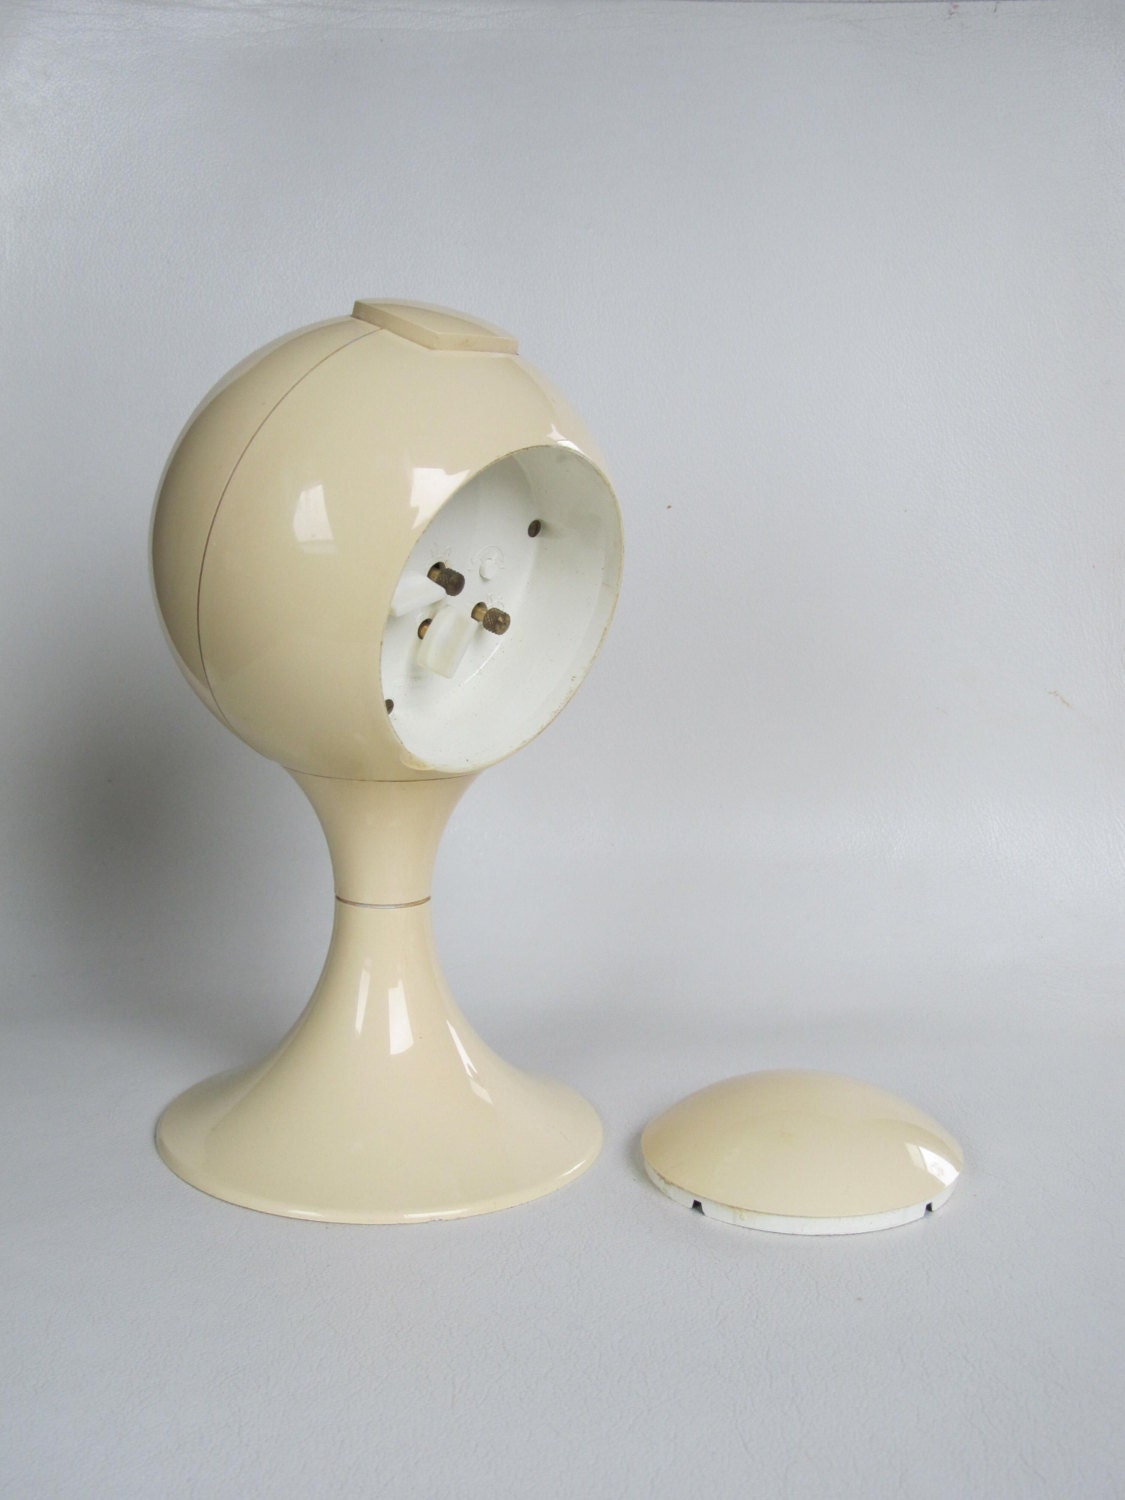 Blessing alarm clock, pedestal tulip shape, made in Germany. Space age era plastic alarm clock from the early 1970s